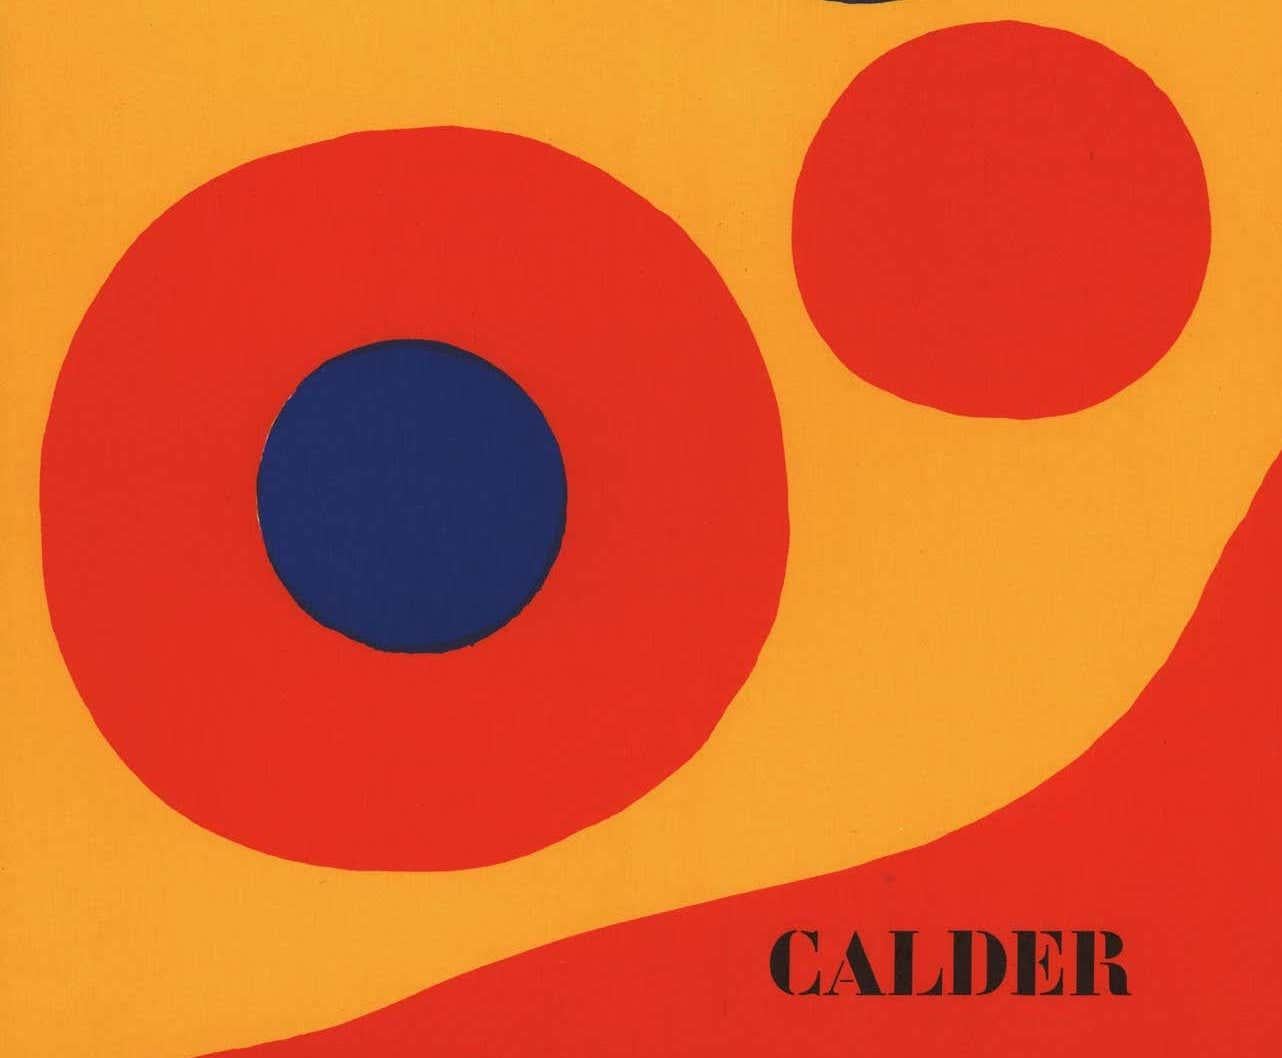 Alexander Calder Lithographic cover: Derrière le miroir 1973:

Lithographic cover sheet; 15 x 11 inches.
Very good overall vintage condition.
Unsigned from an edition of unknown.
Portfolio: Derrière le miroir, 1973.
Looks superb matted & framed.